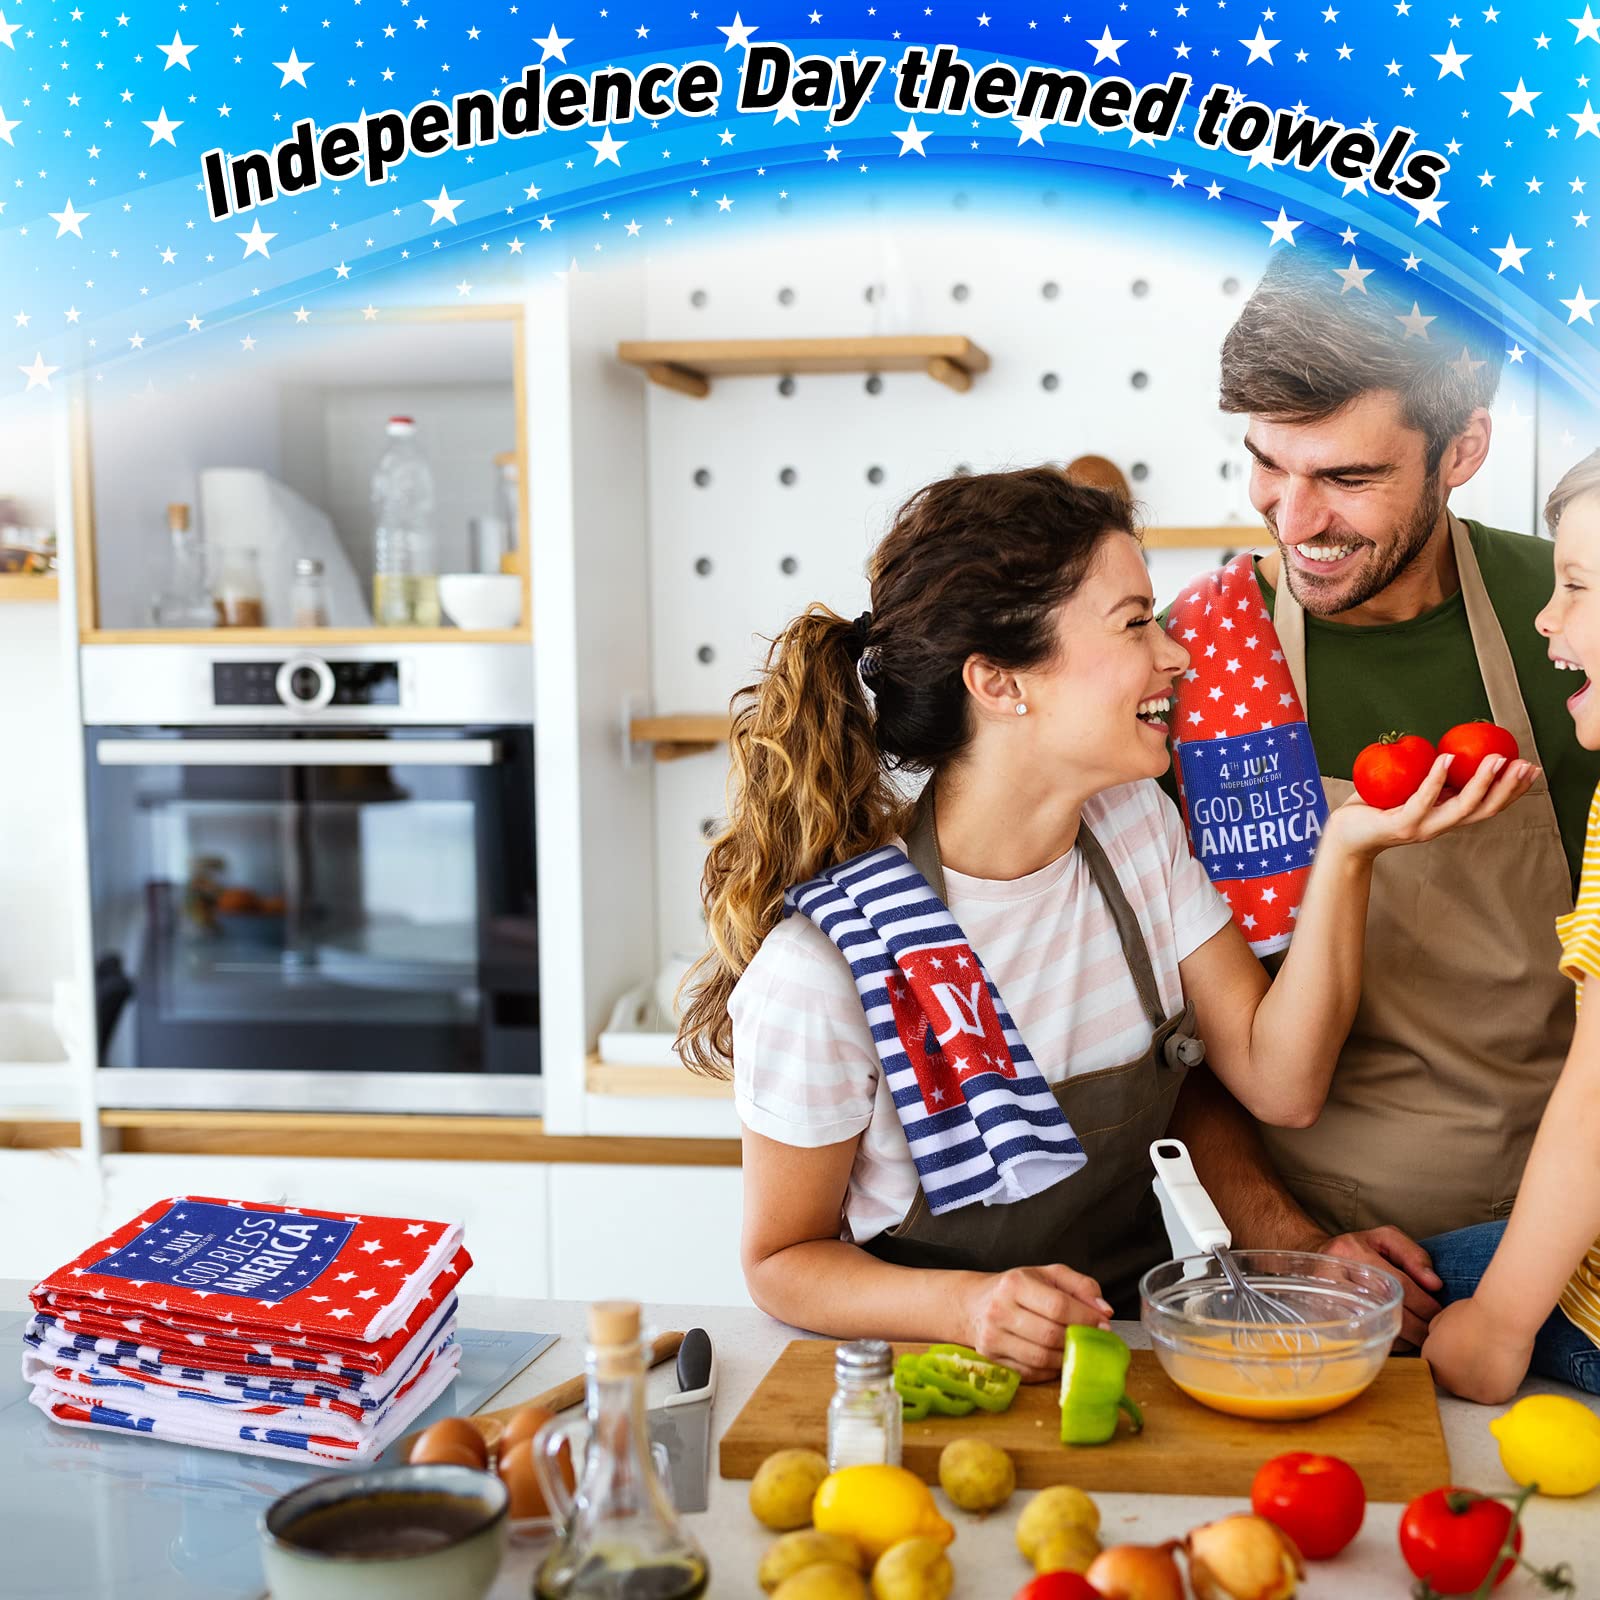 American Flag Stars Stripes Kitchen Dish Towels 15.8 x 23.6 Inch 4th of July Patriotic Dishcloth Red Blue White Tea Towel Decorative Hand Towel for Bathroom Baking Independence Day Gift Set of 4